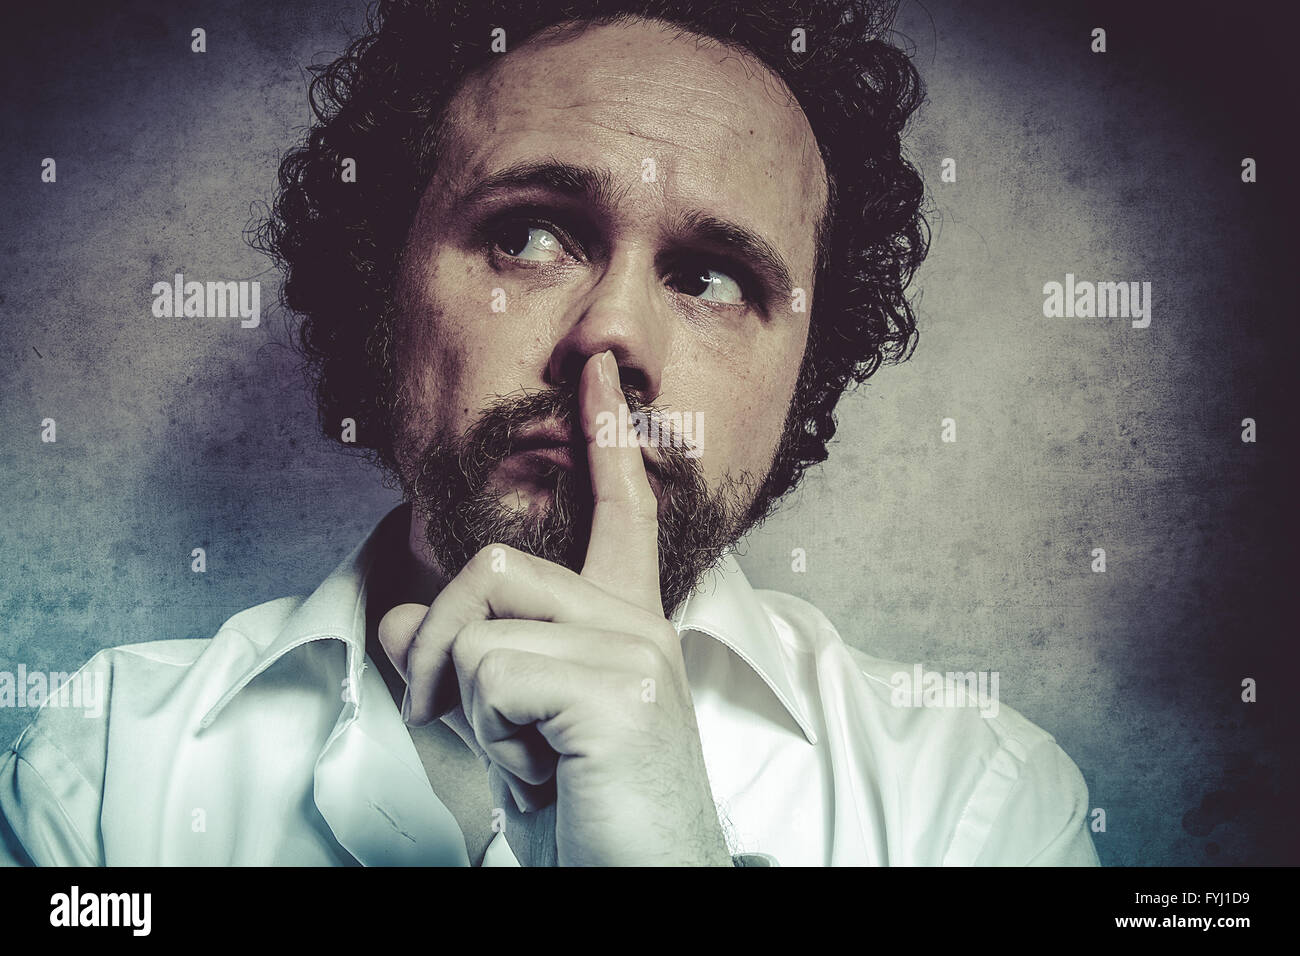 decisionmaking, man in white shirt with funny expressions Stock Photo